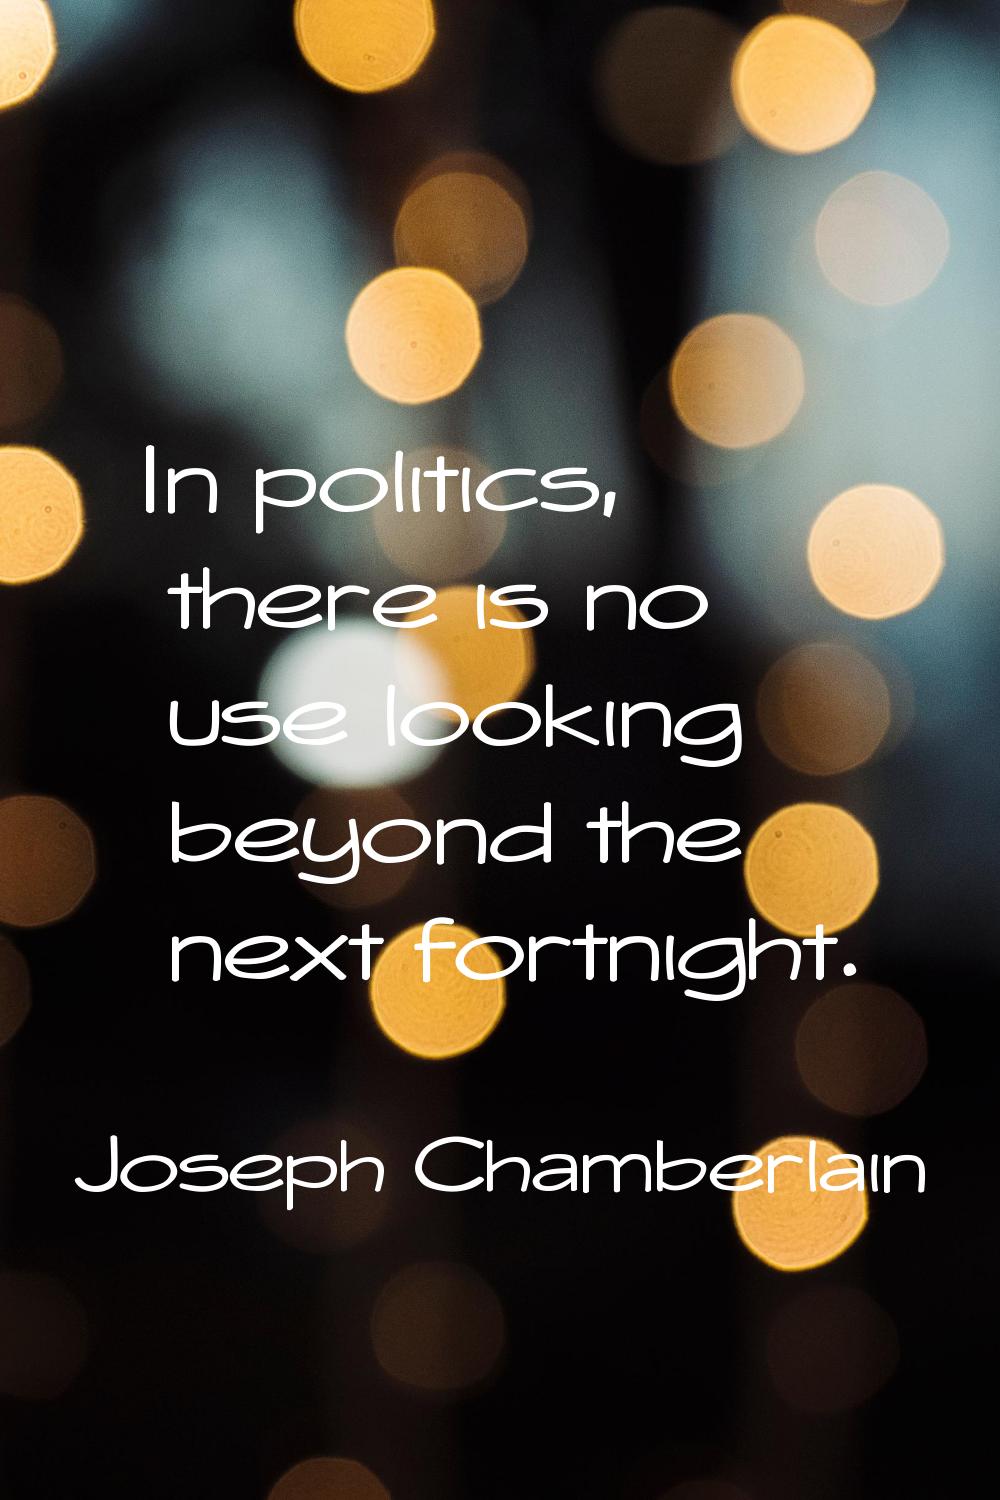 In politics, there is no use looking beyond the next fortnight.